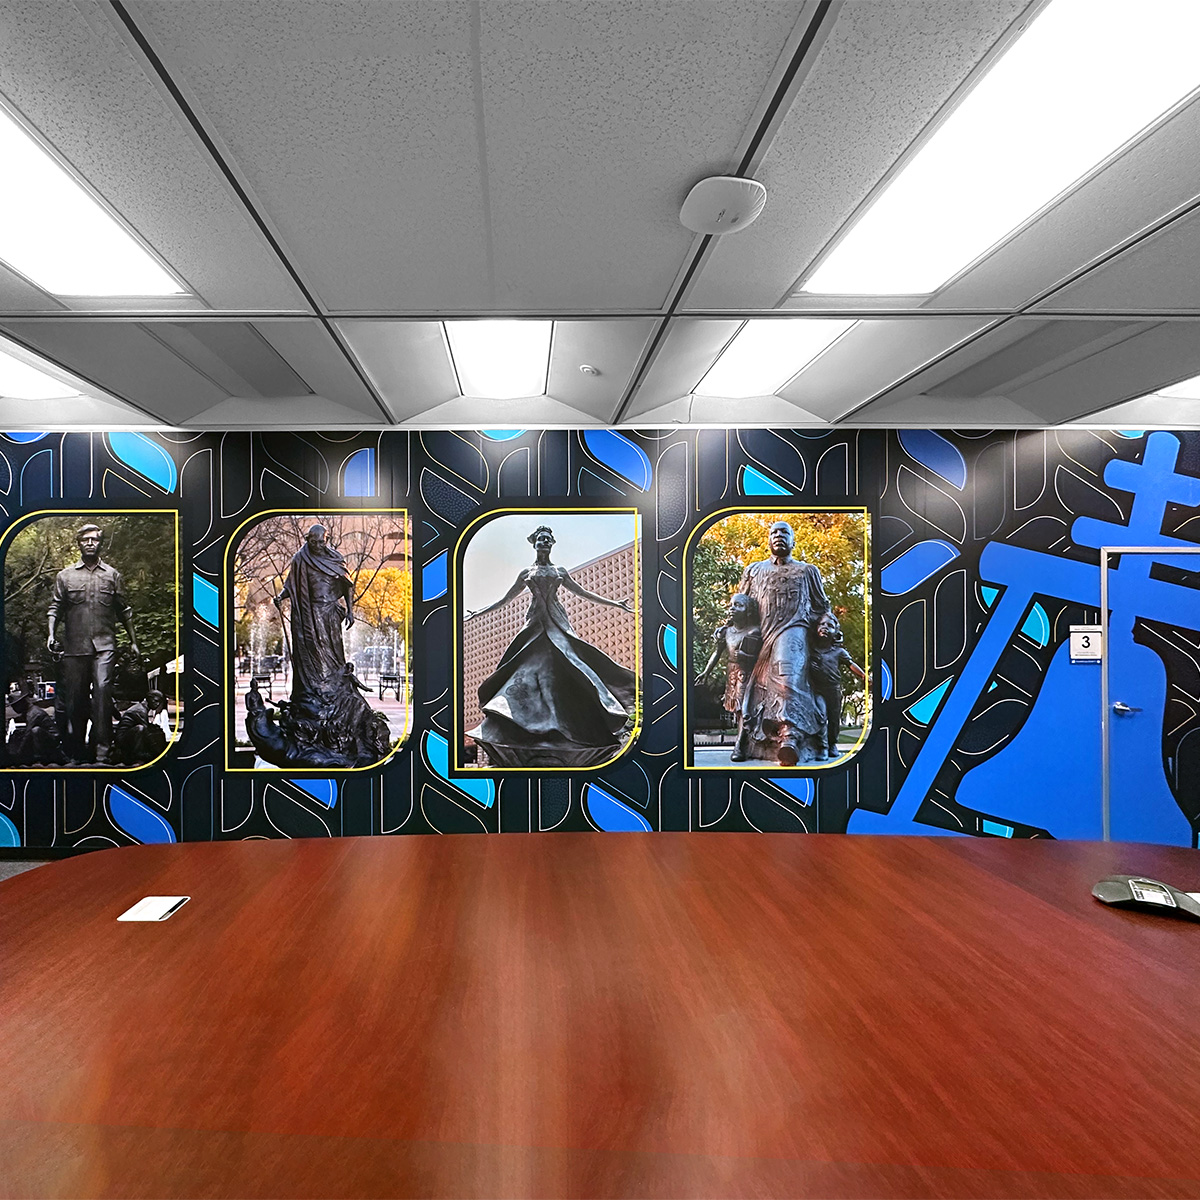 Wall Graphics: Riverside Public Utilities Conference Room